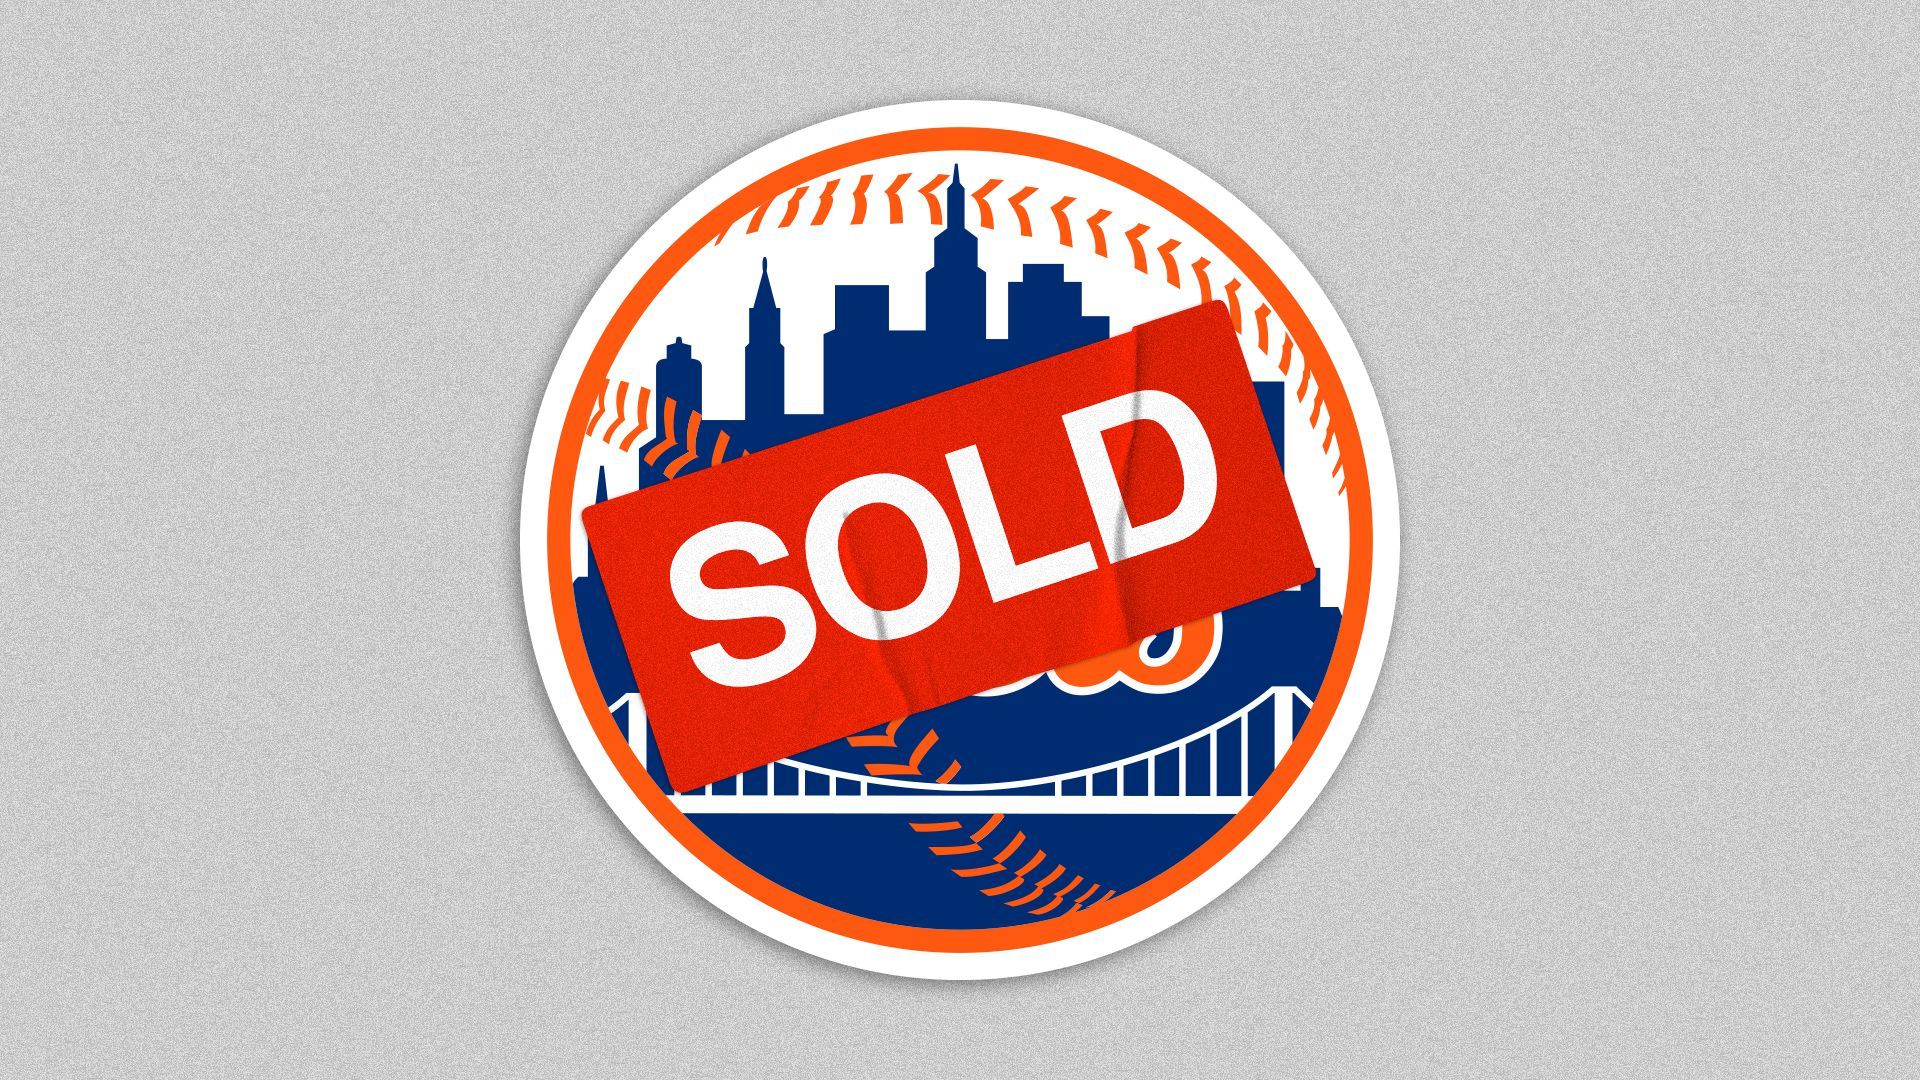 Illustration of the Mets logo with a sold sticker on top.